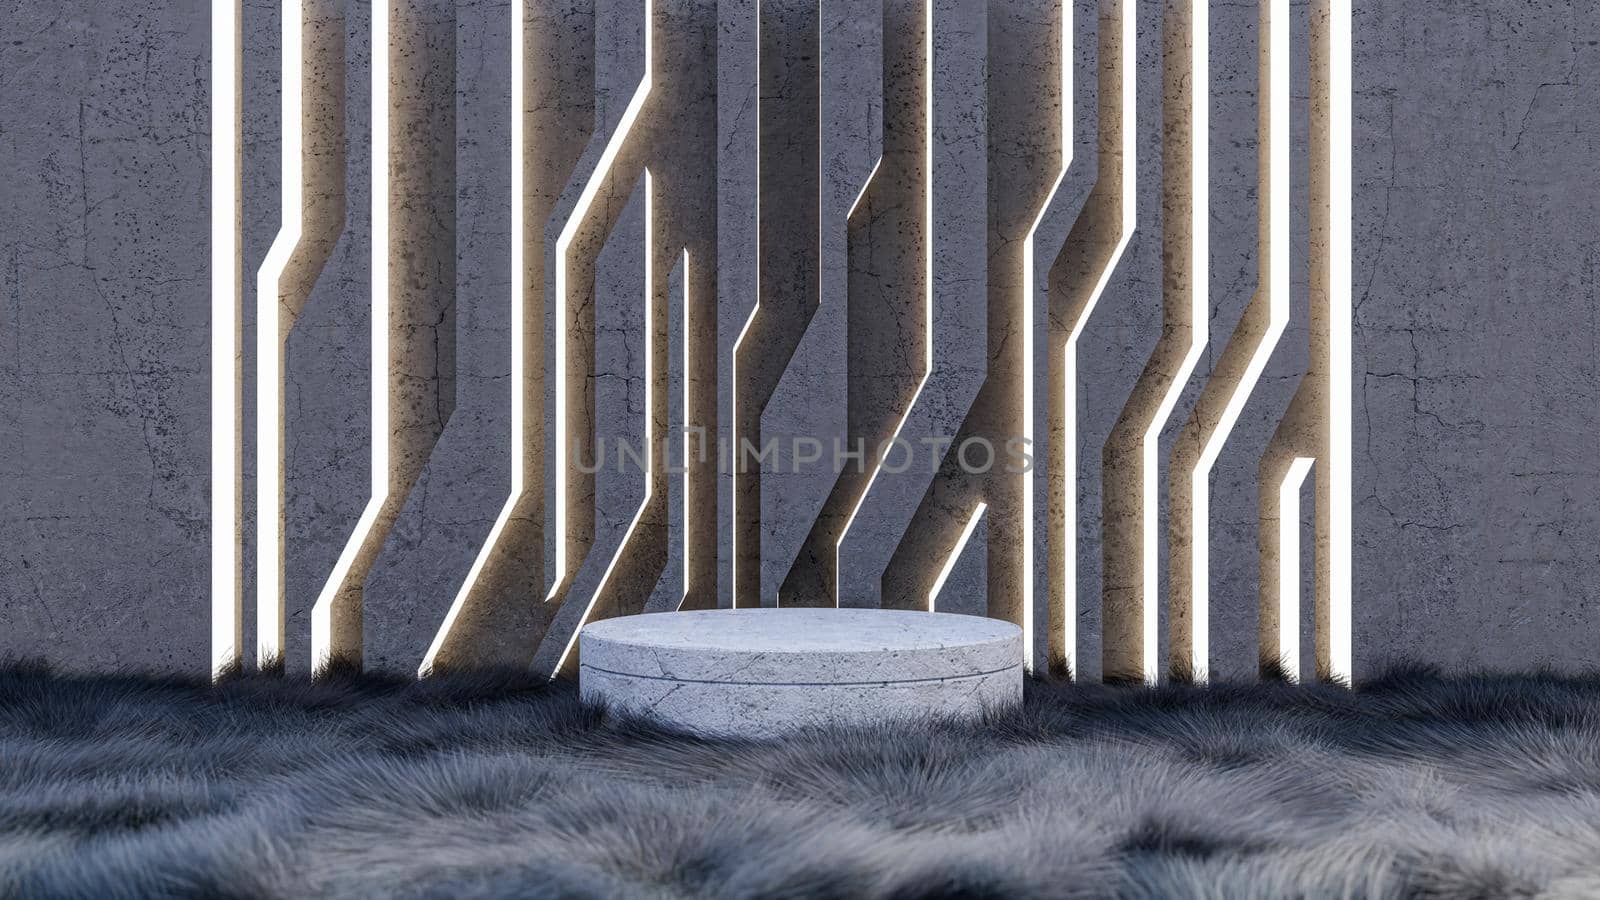 A 3d rendering image of product display on black fur floor and cracked concrete wall by Kankliang